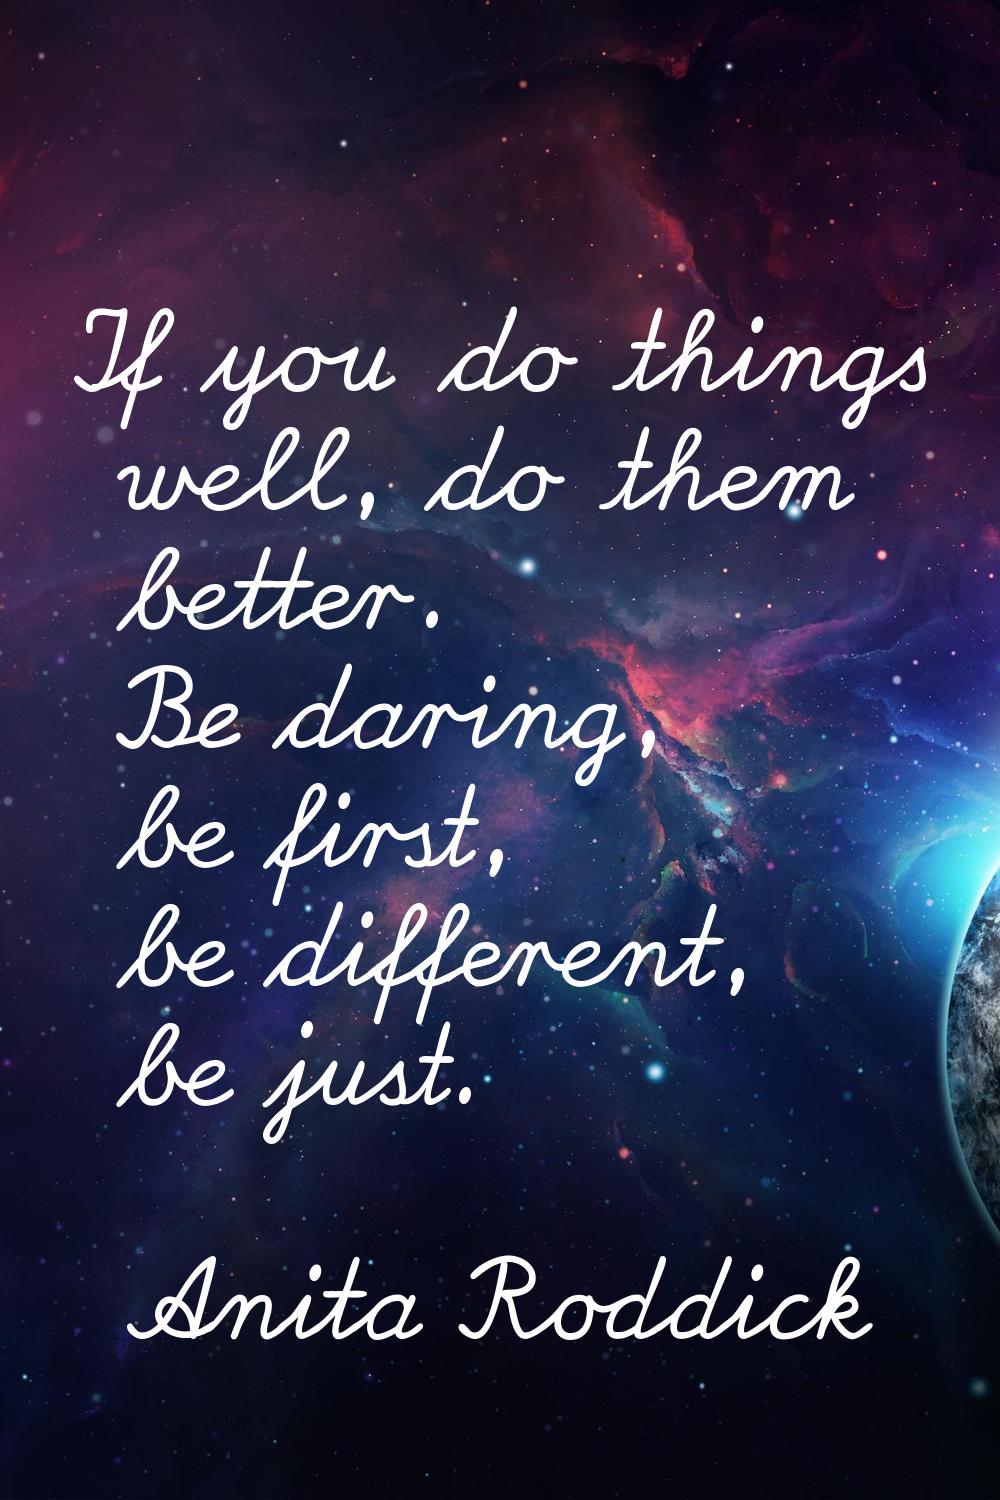 If you do things well, do them better. Be daring, be first, be different, be just.